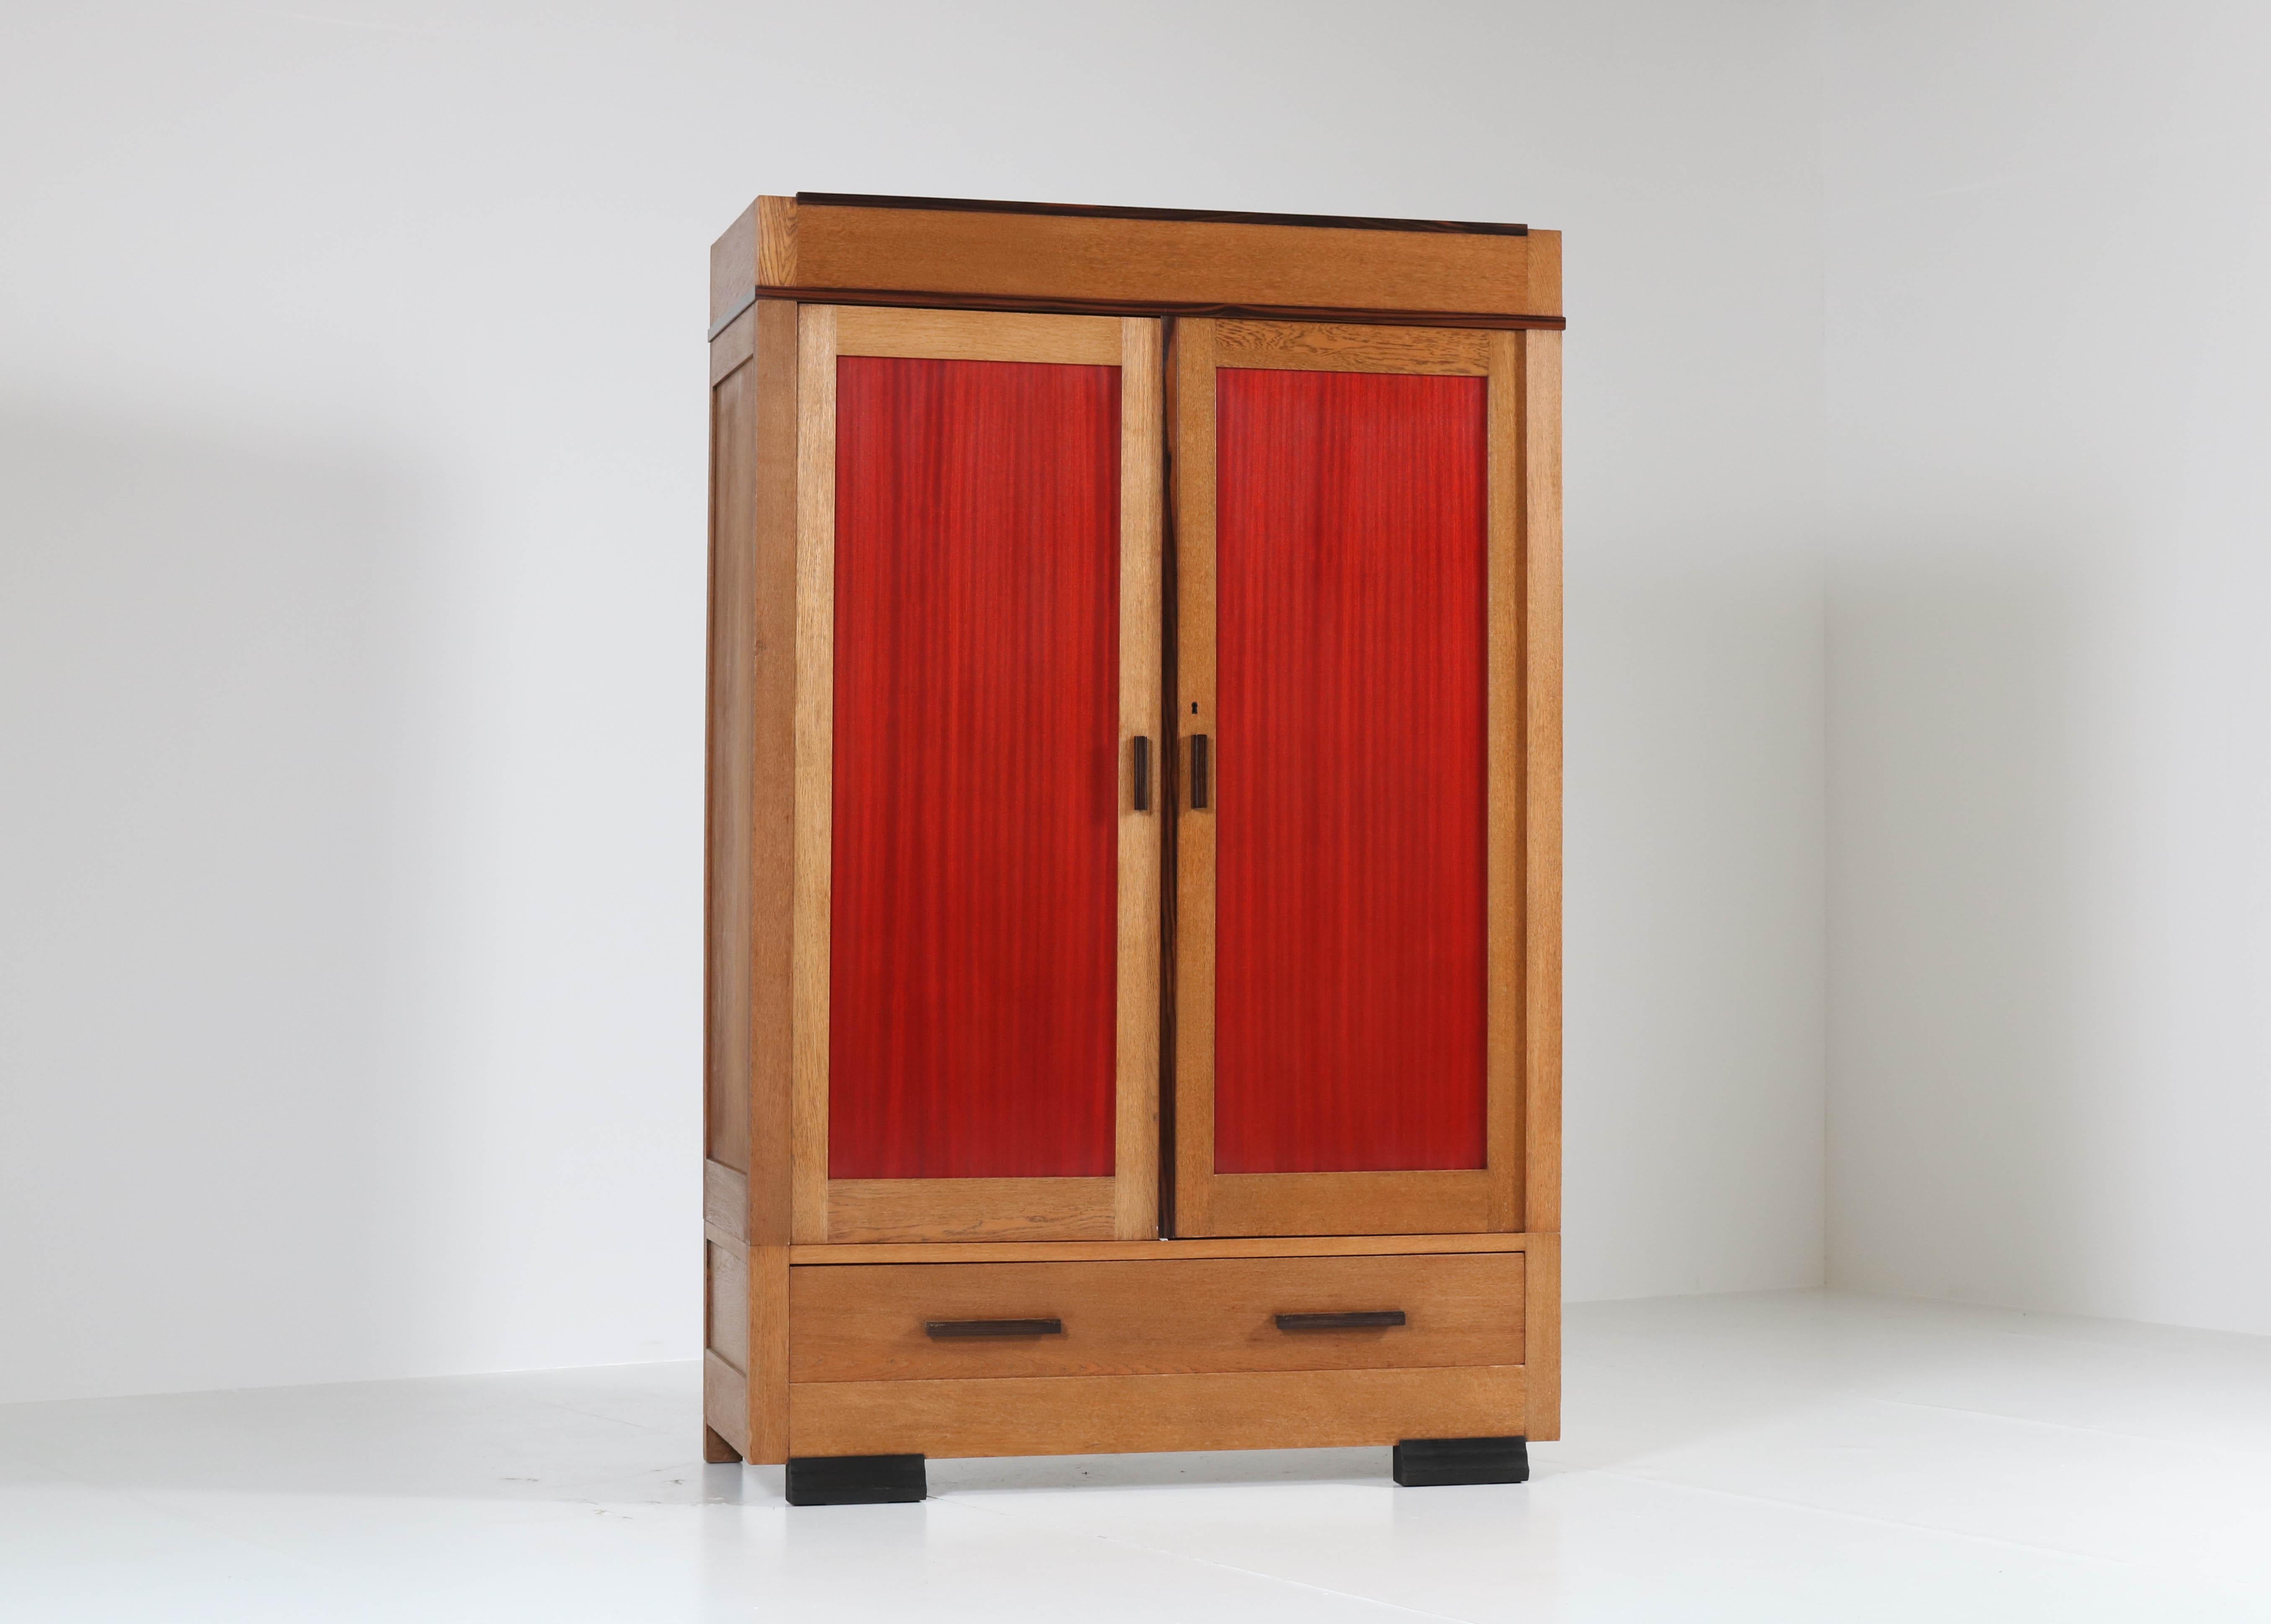 Stunning and rare Art Deco Haagse School armoir or wardrobe.
Design by Fa. Drilling Amsterdam.
Striking Dutch design from the 1920s.
Solid oak and solid ebony Macassar with mahogany panels in the doors.
This wardrobe can be dismantled for easy